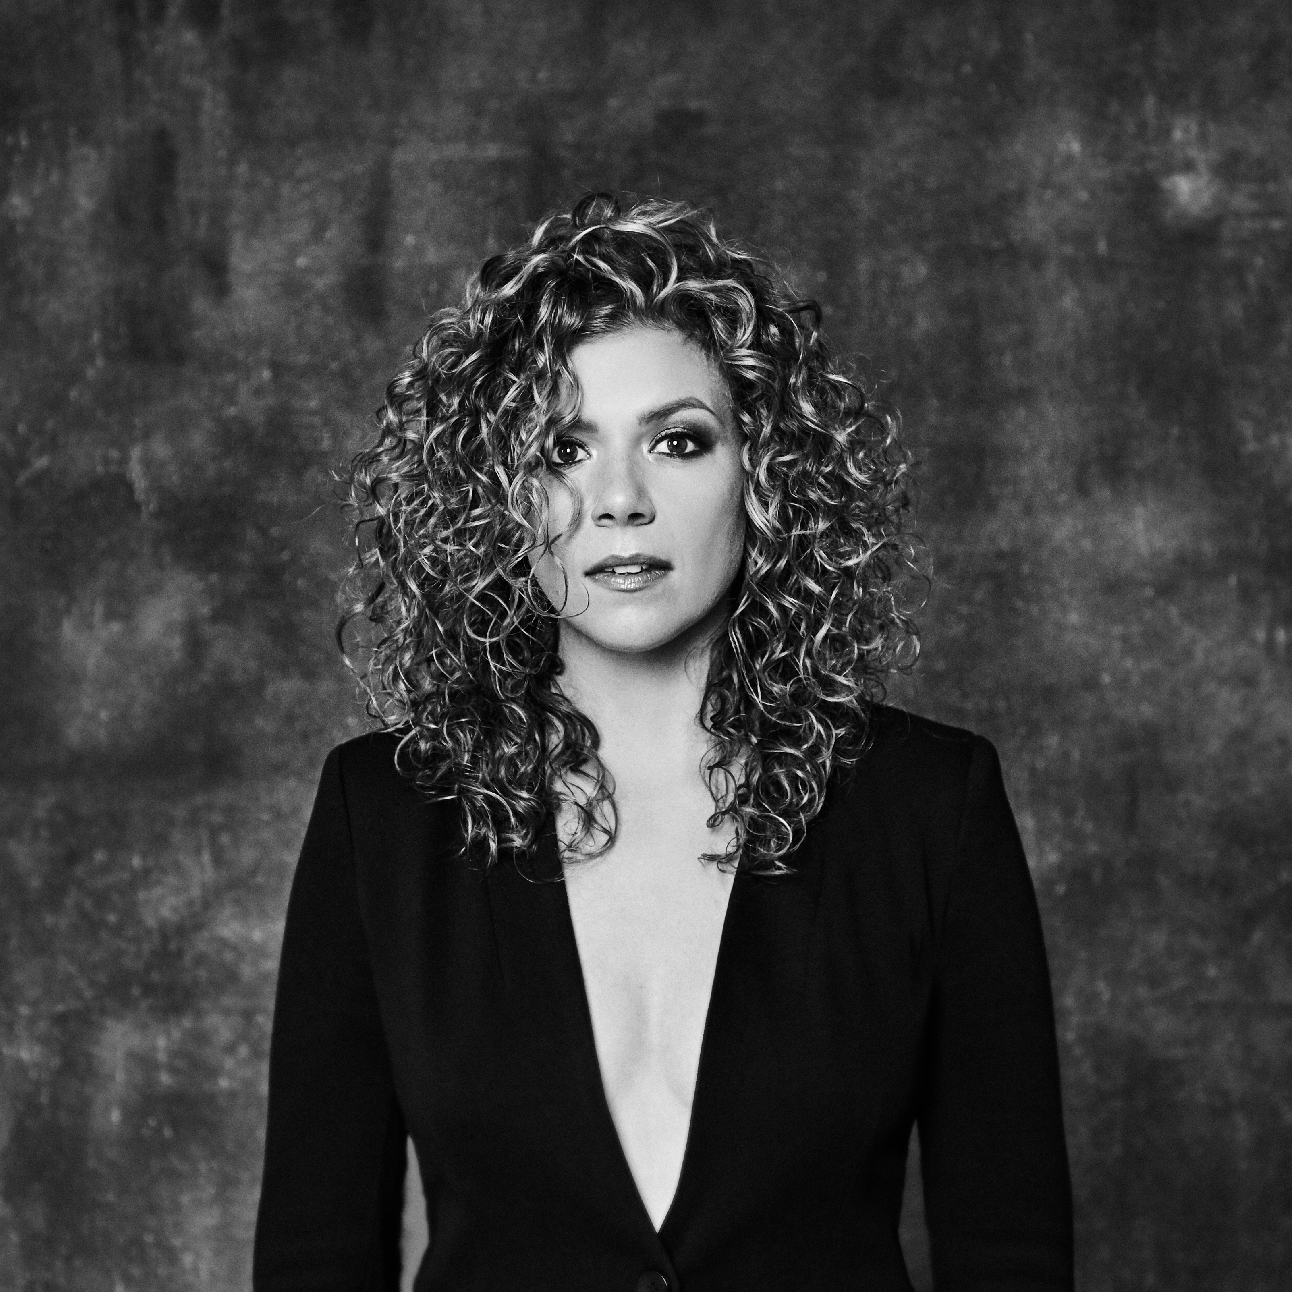 Black and white portrait, woman, curly hair, black jacket